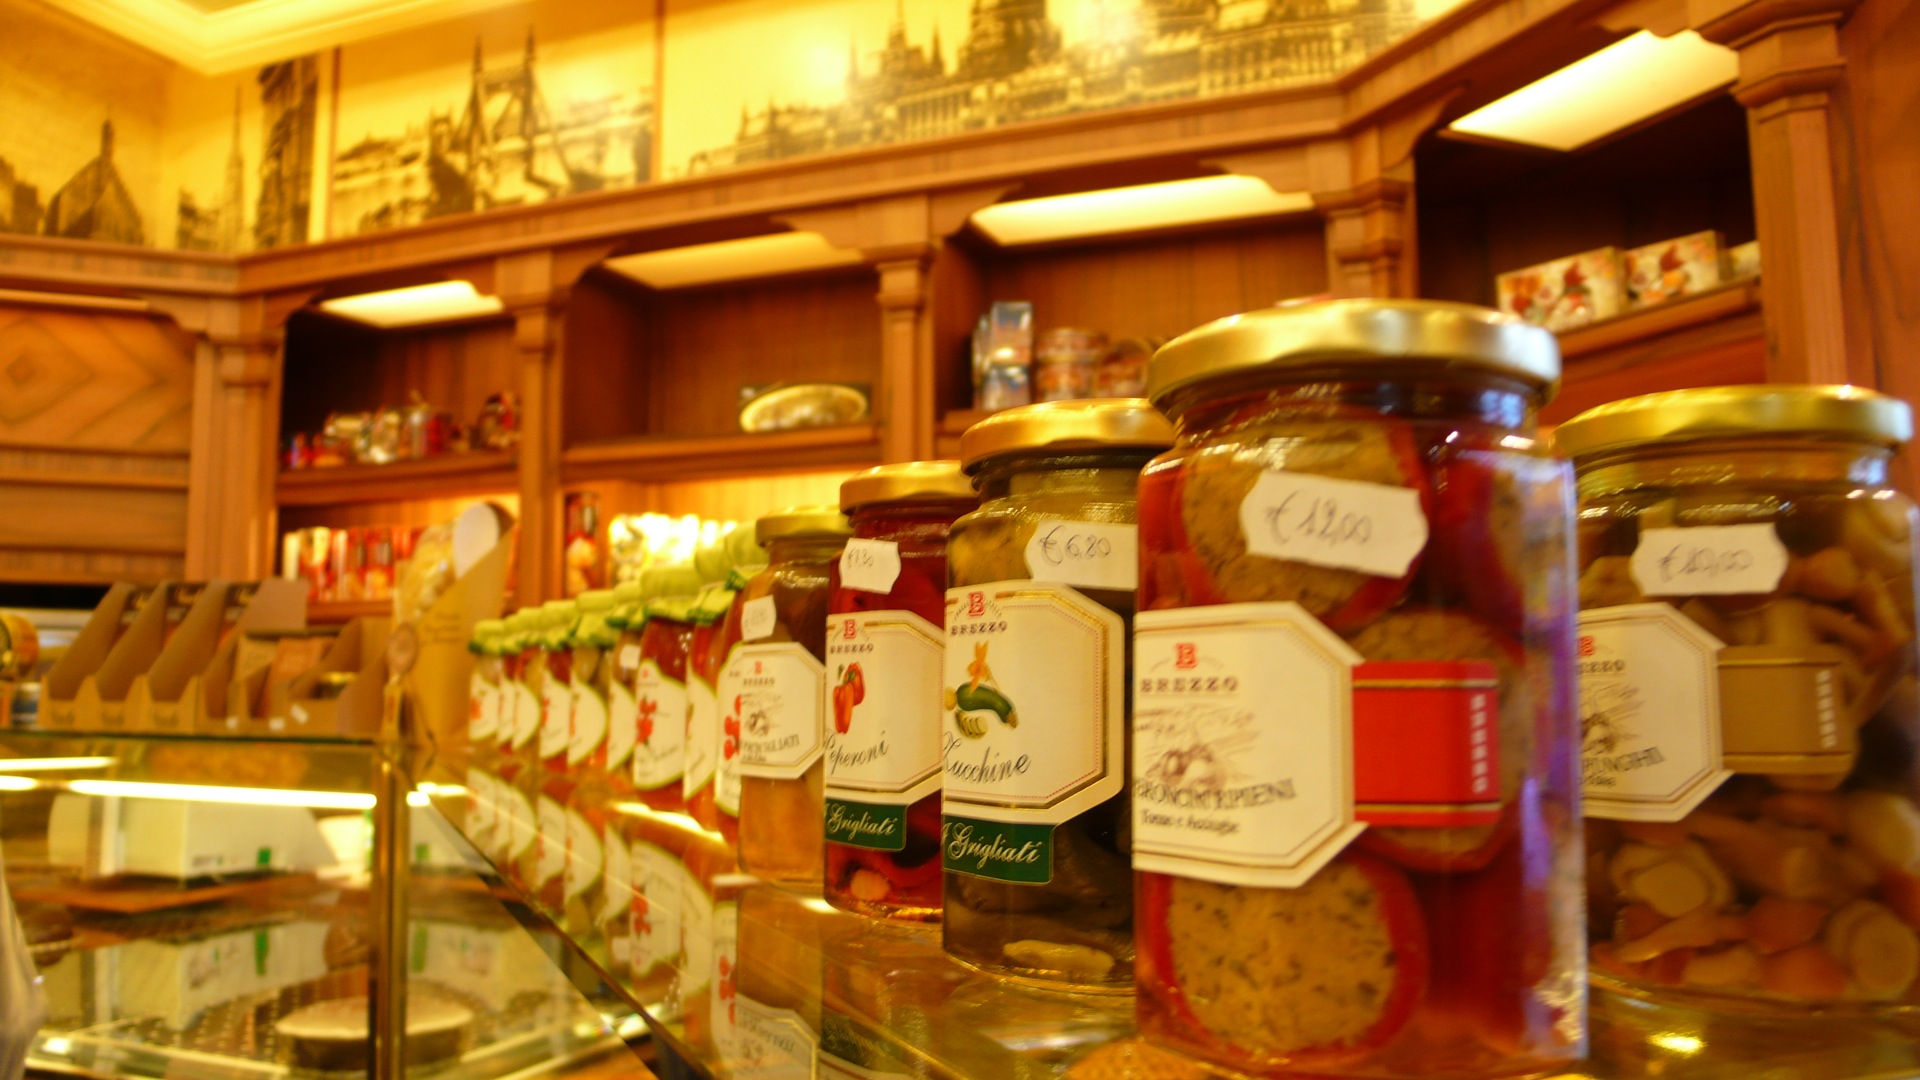 many jars with labels are stacked on display